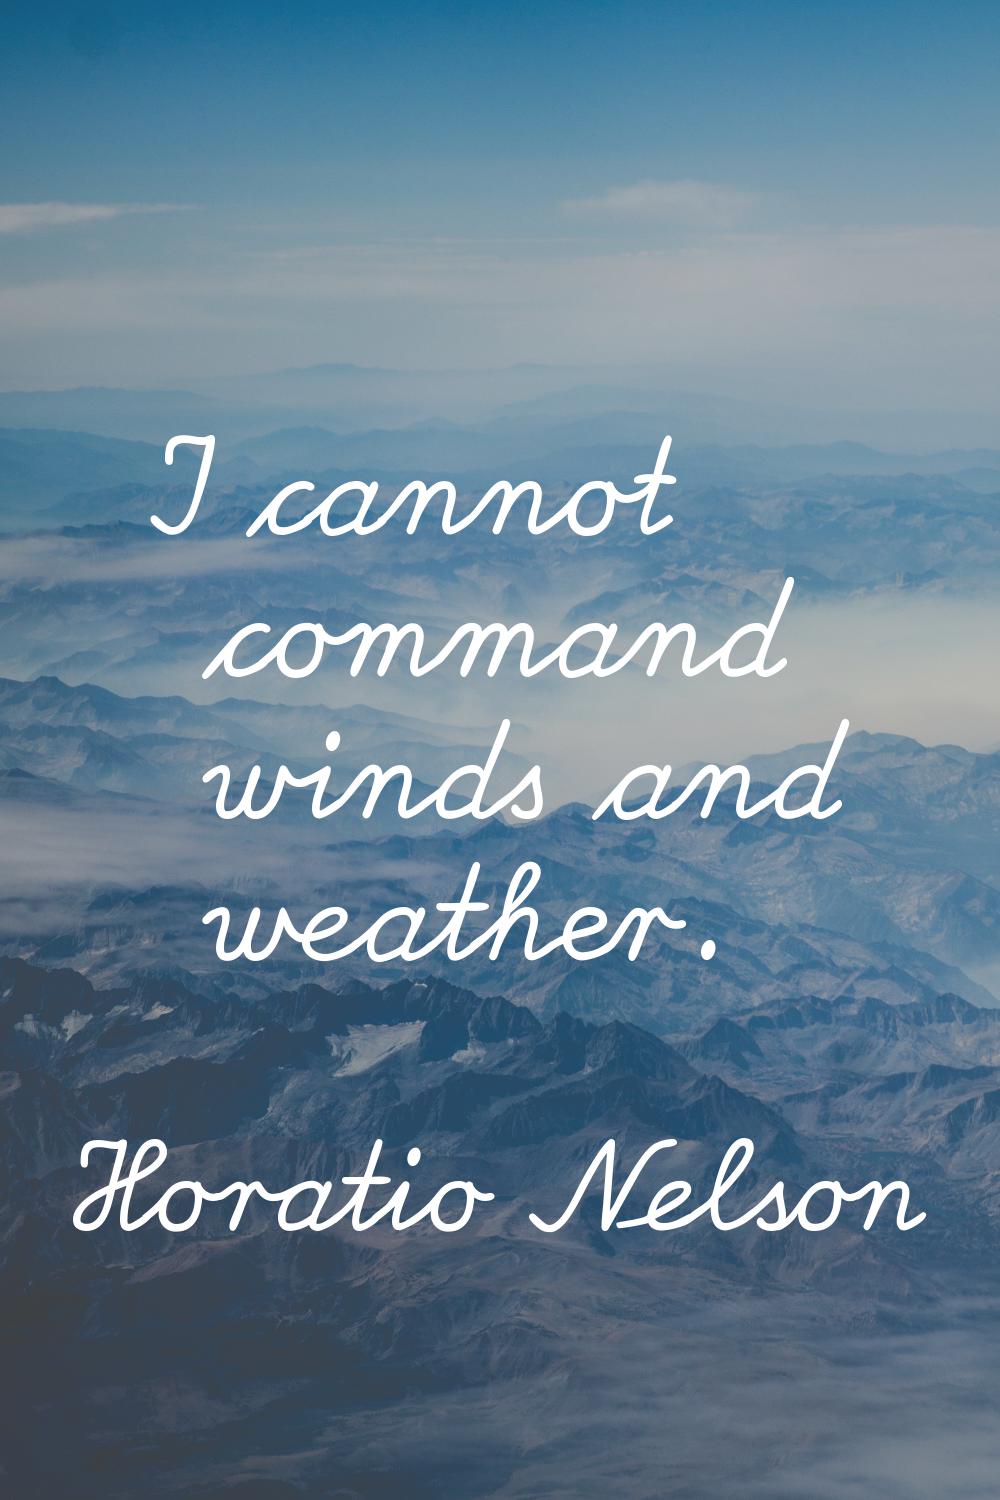 I cannot command winds and weather.